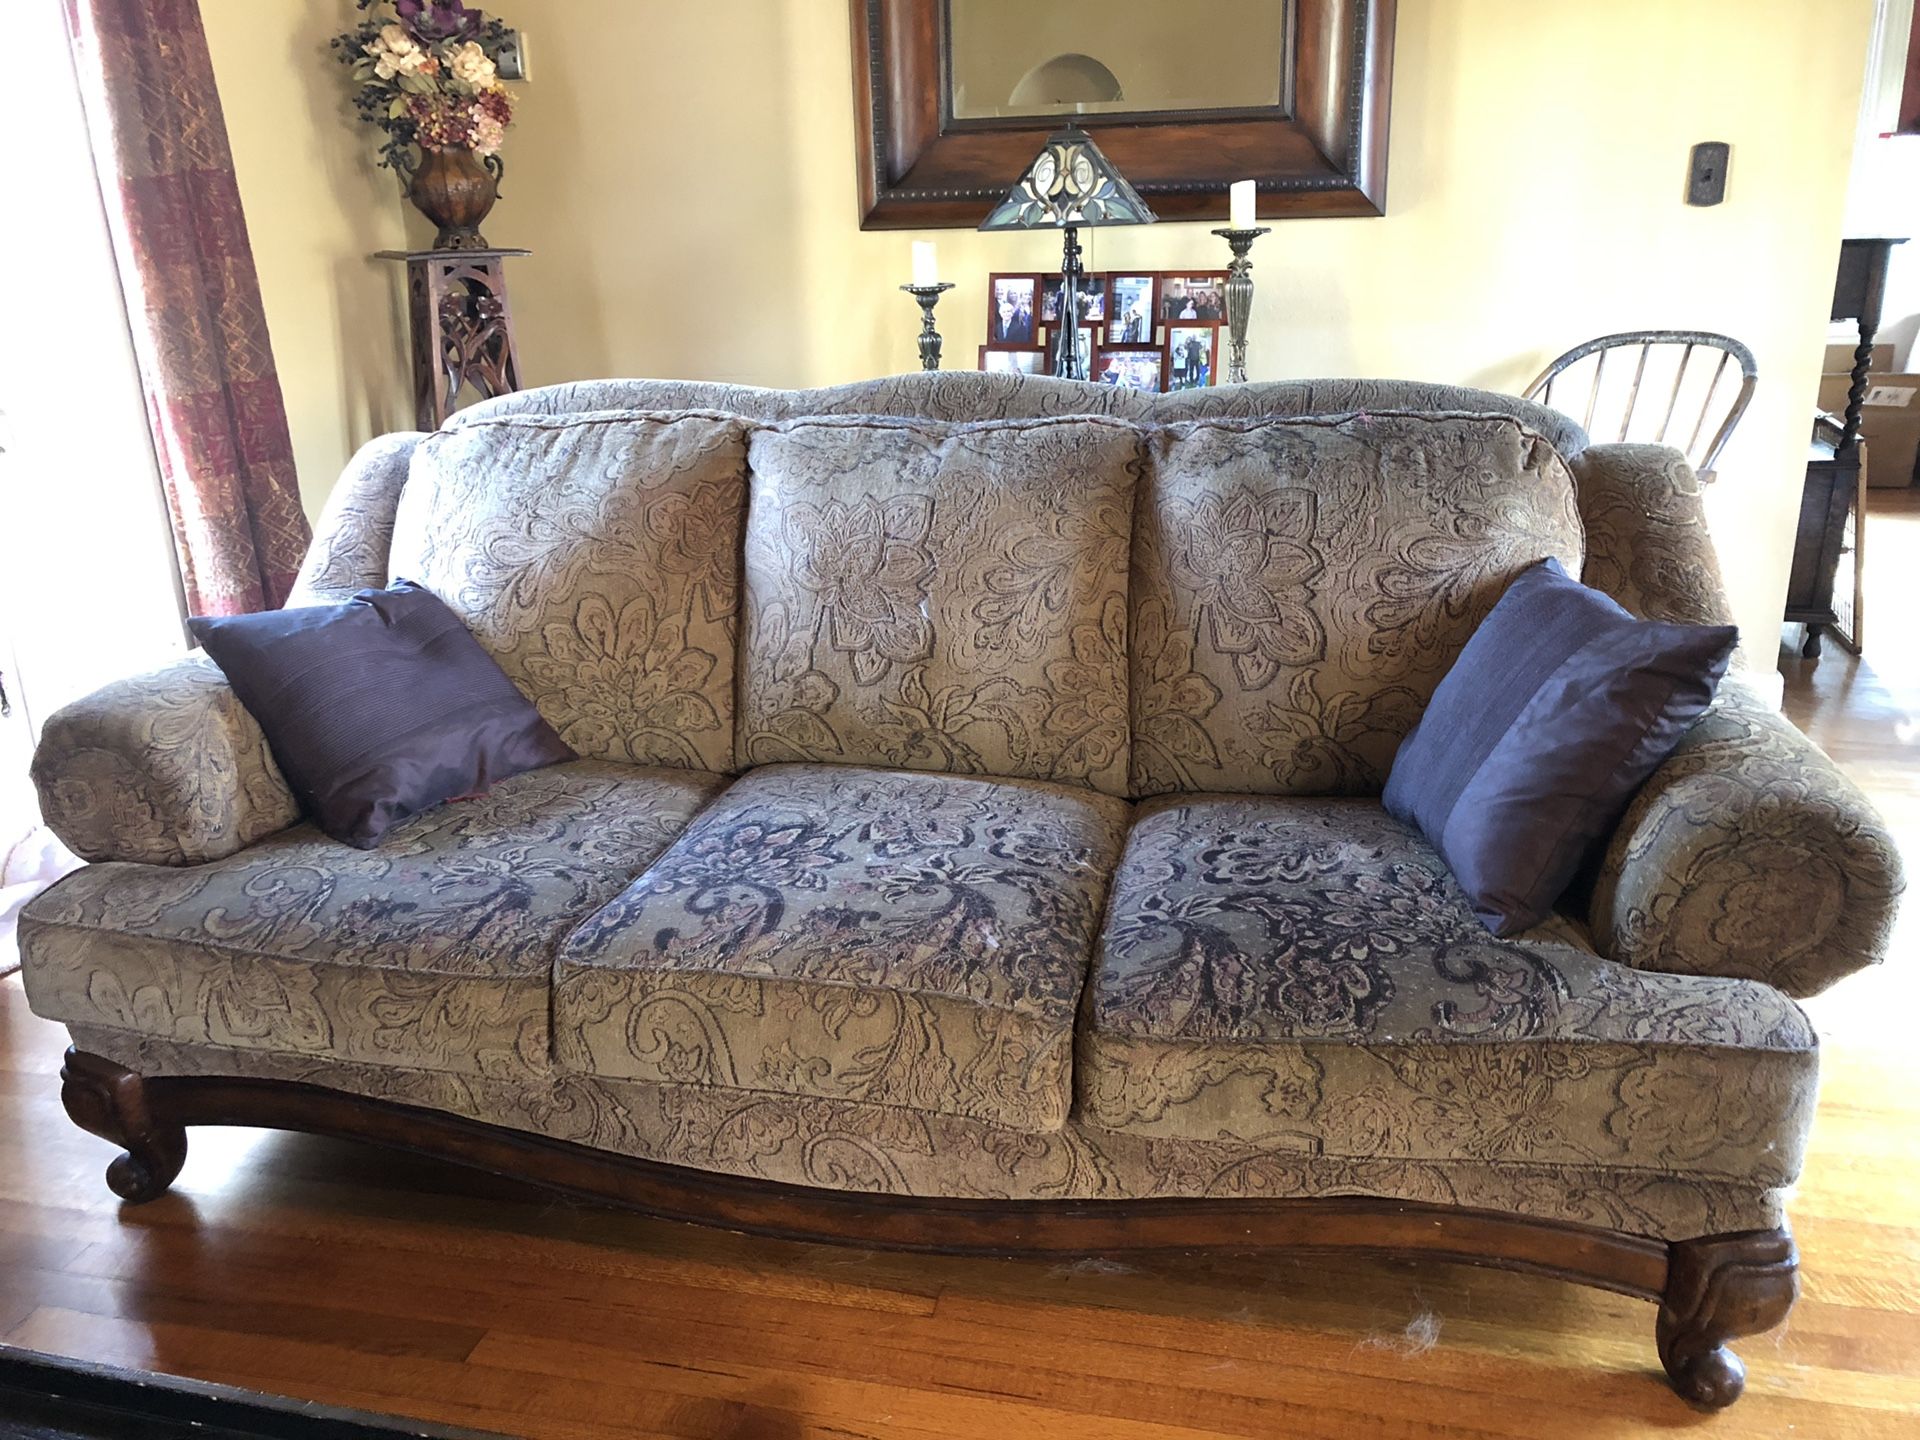 Ashley furniture sofa and loveseat - $20 for both